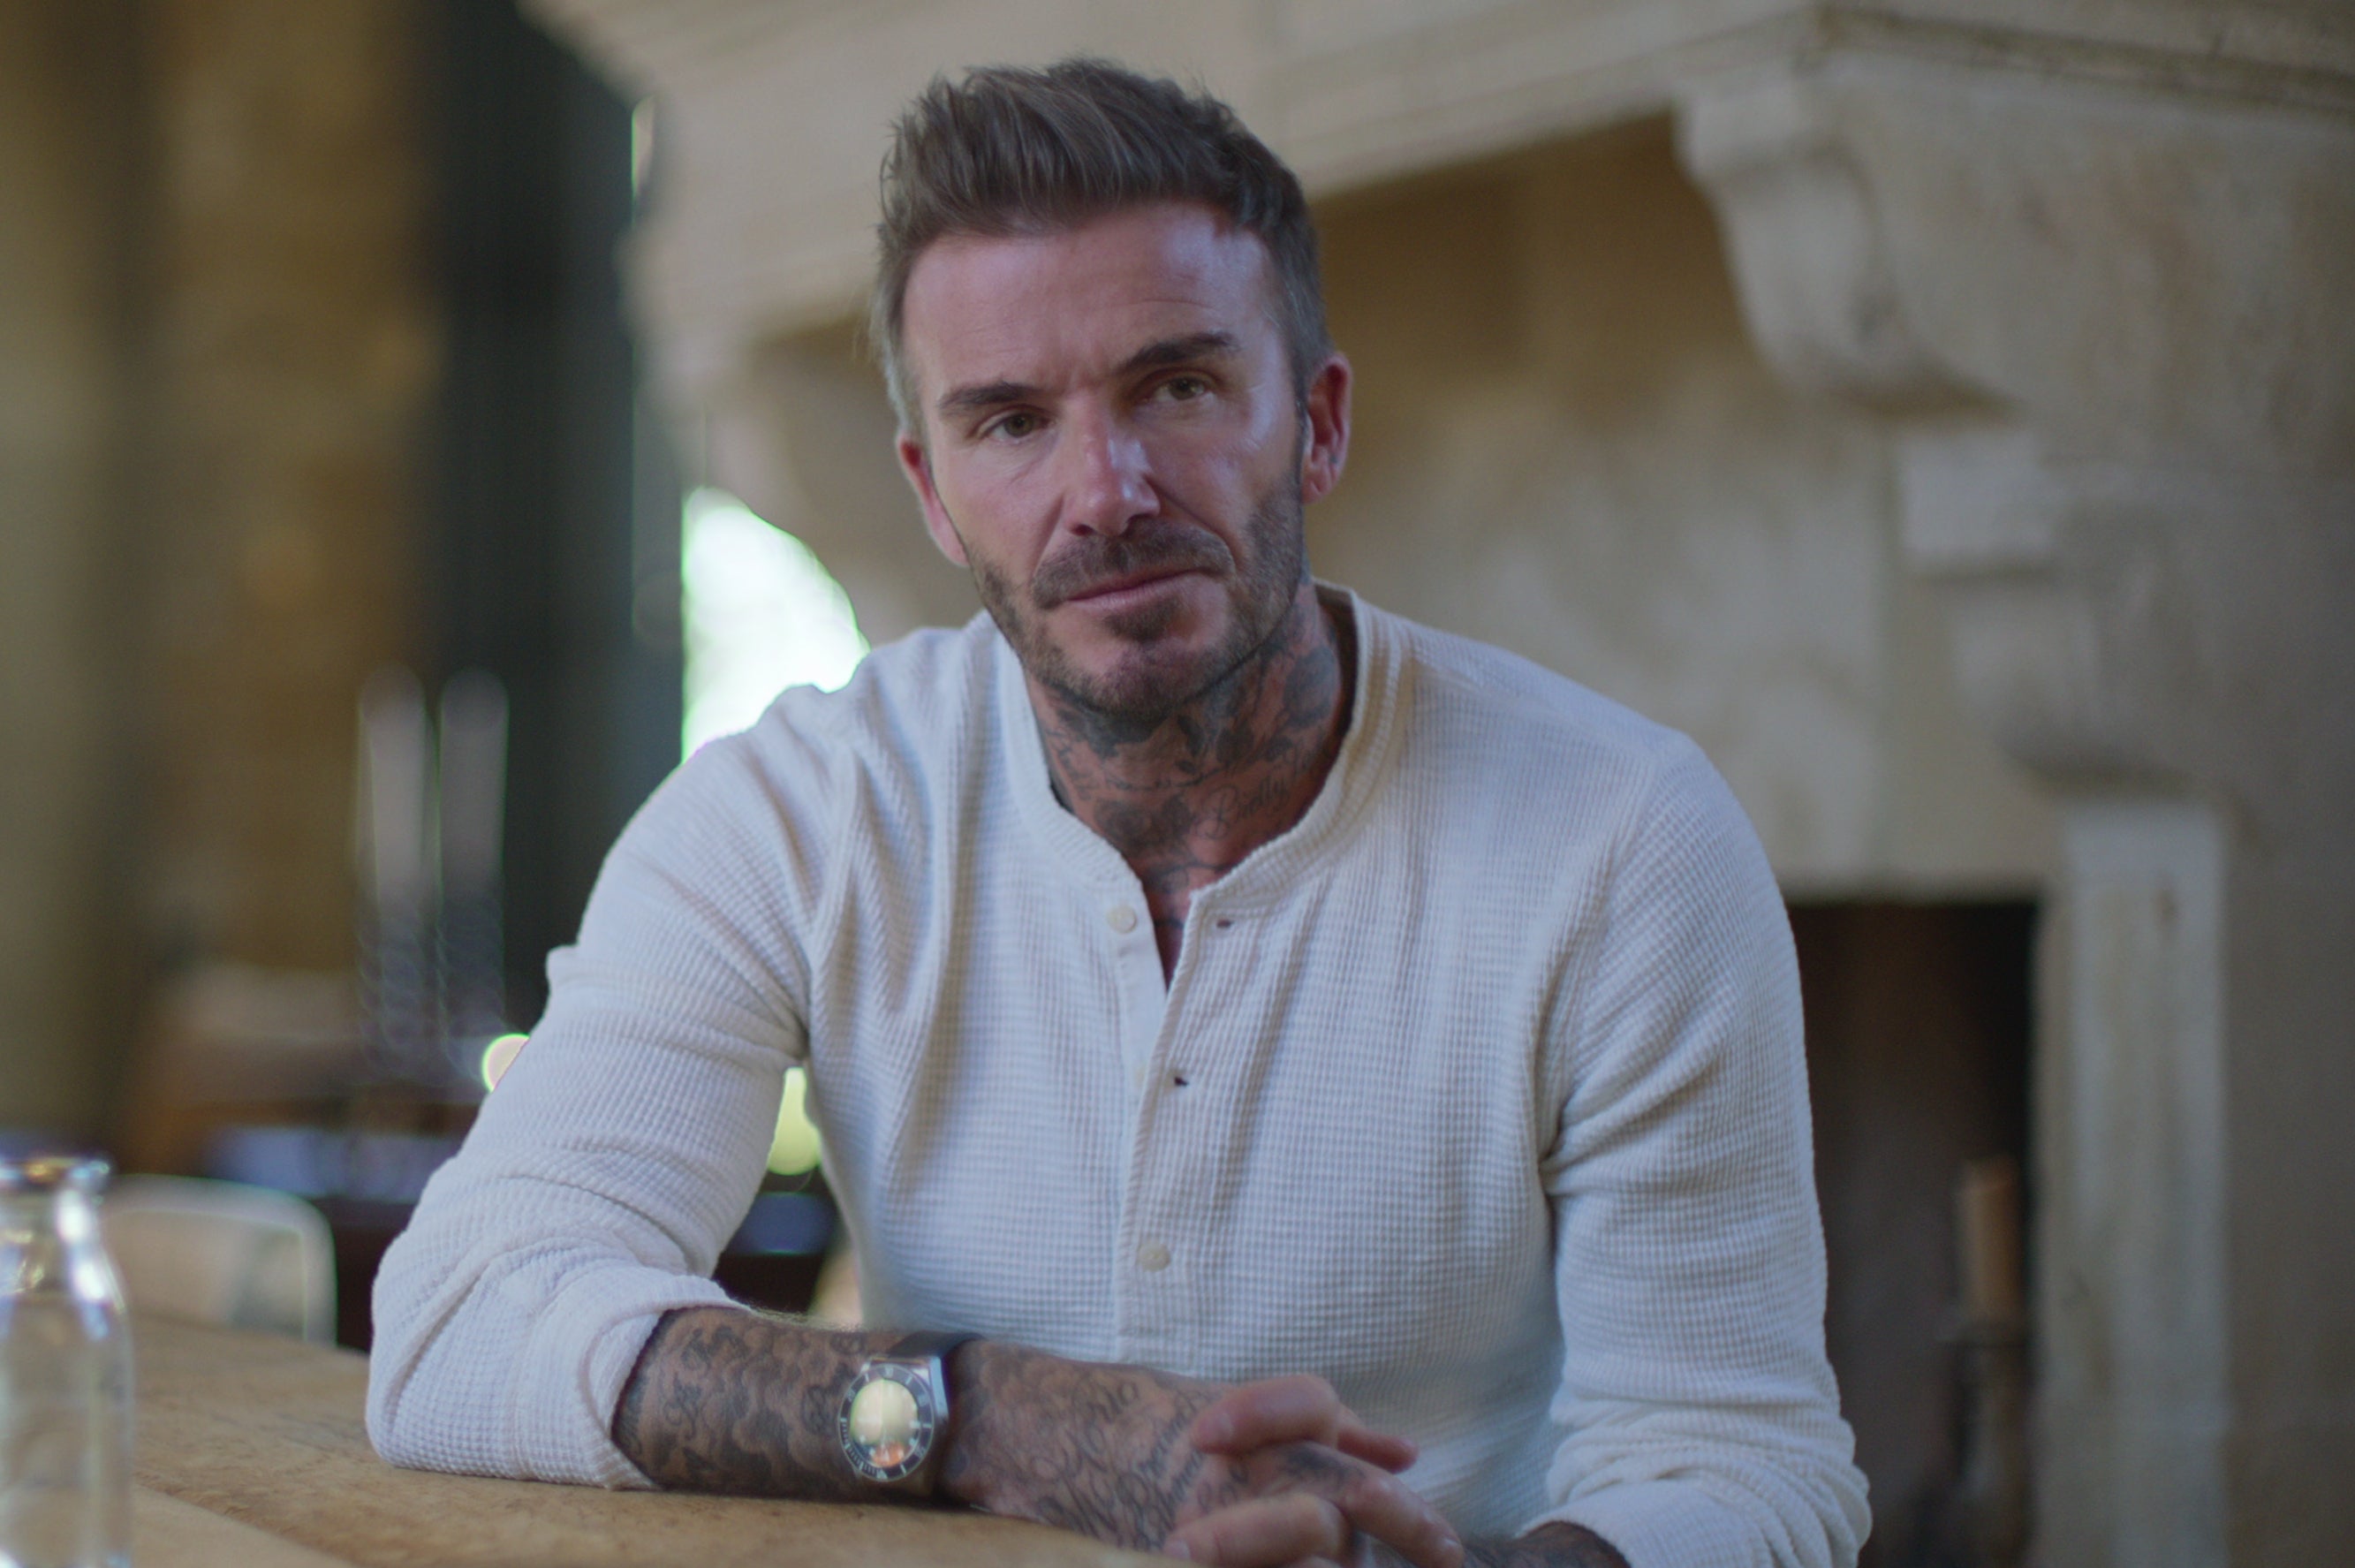 David Beckham said members of the LGBTQ+ community told him they felt safe during the Qatar World Cup